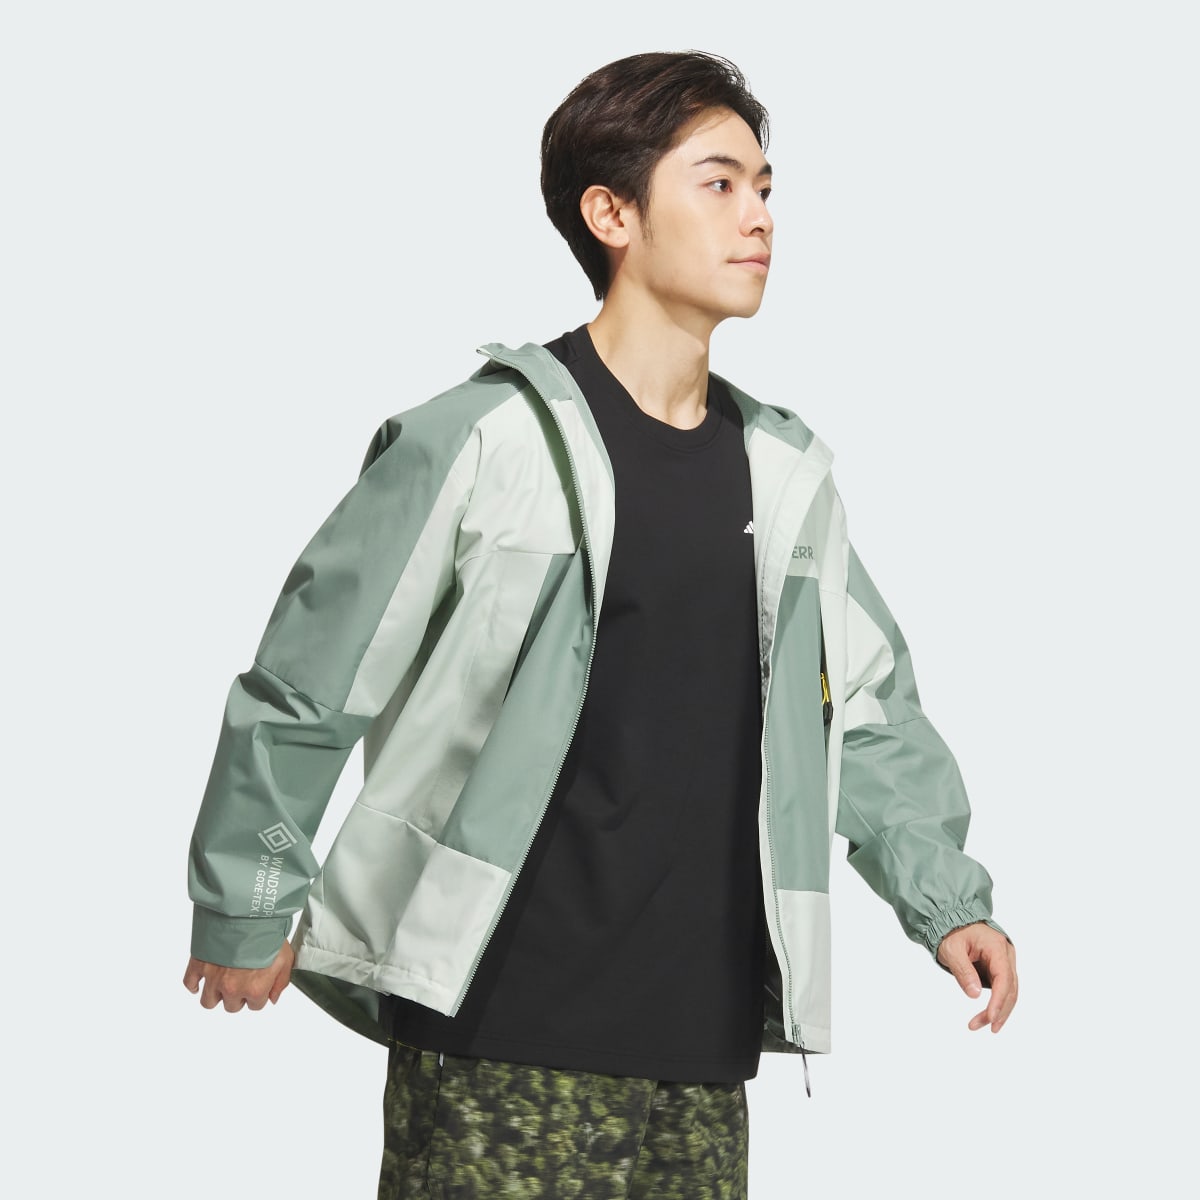 Adidas National Geographic WINDSTOPPER® Jacket. 8